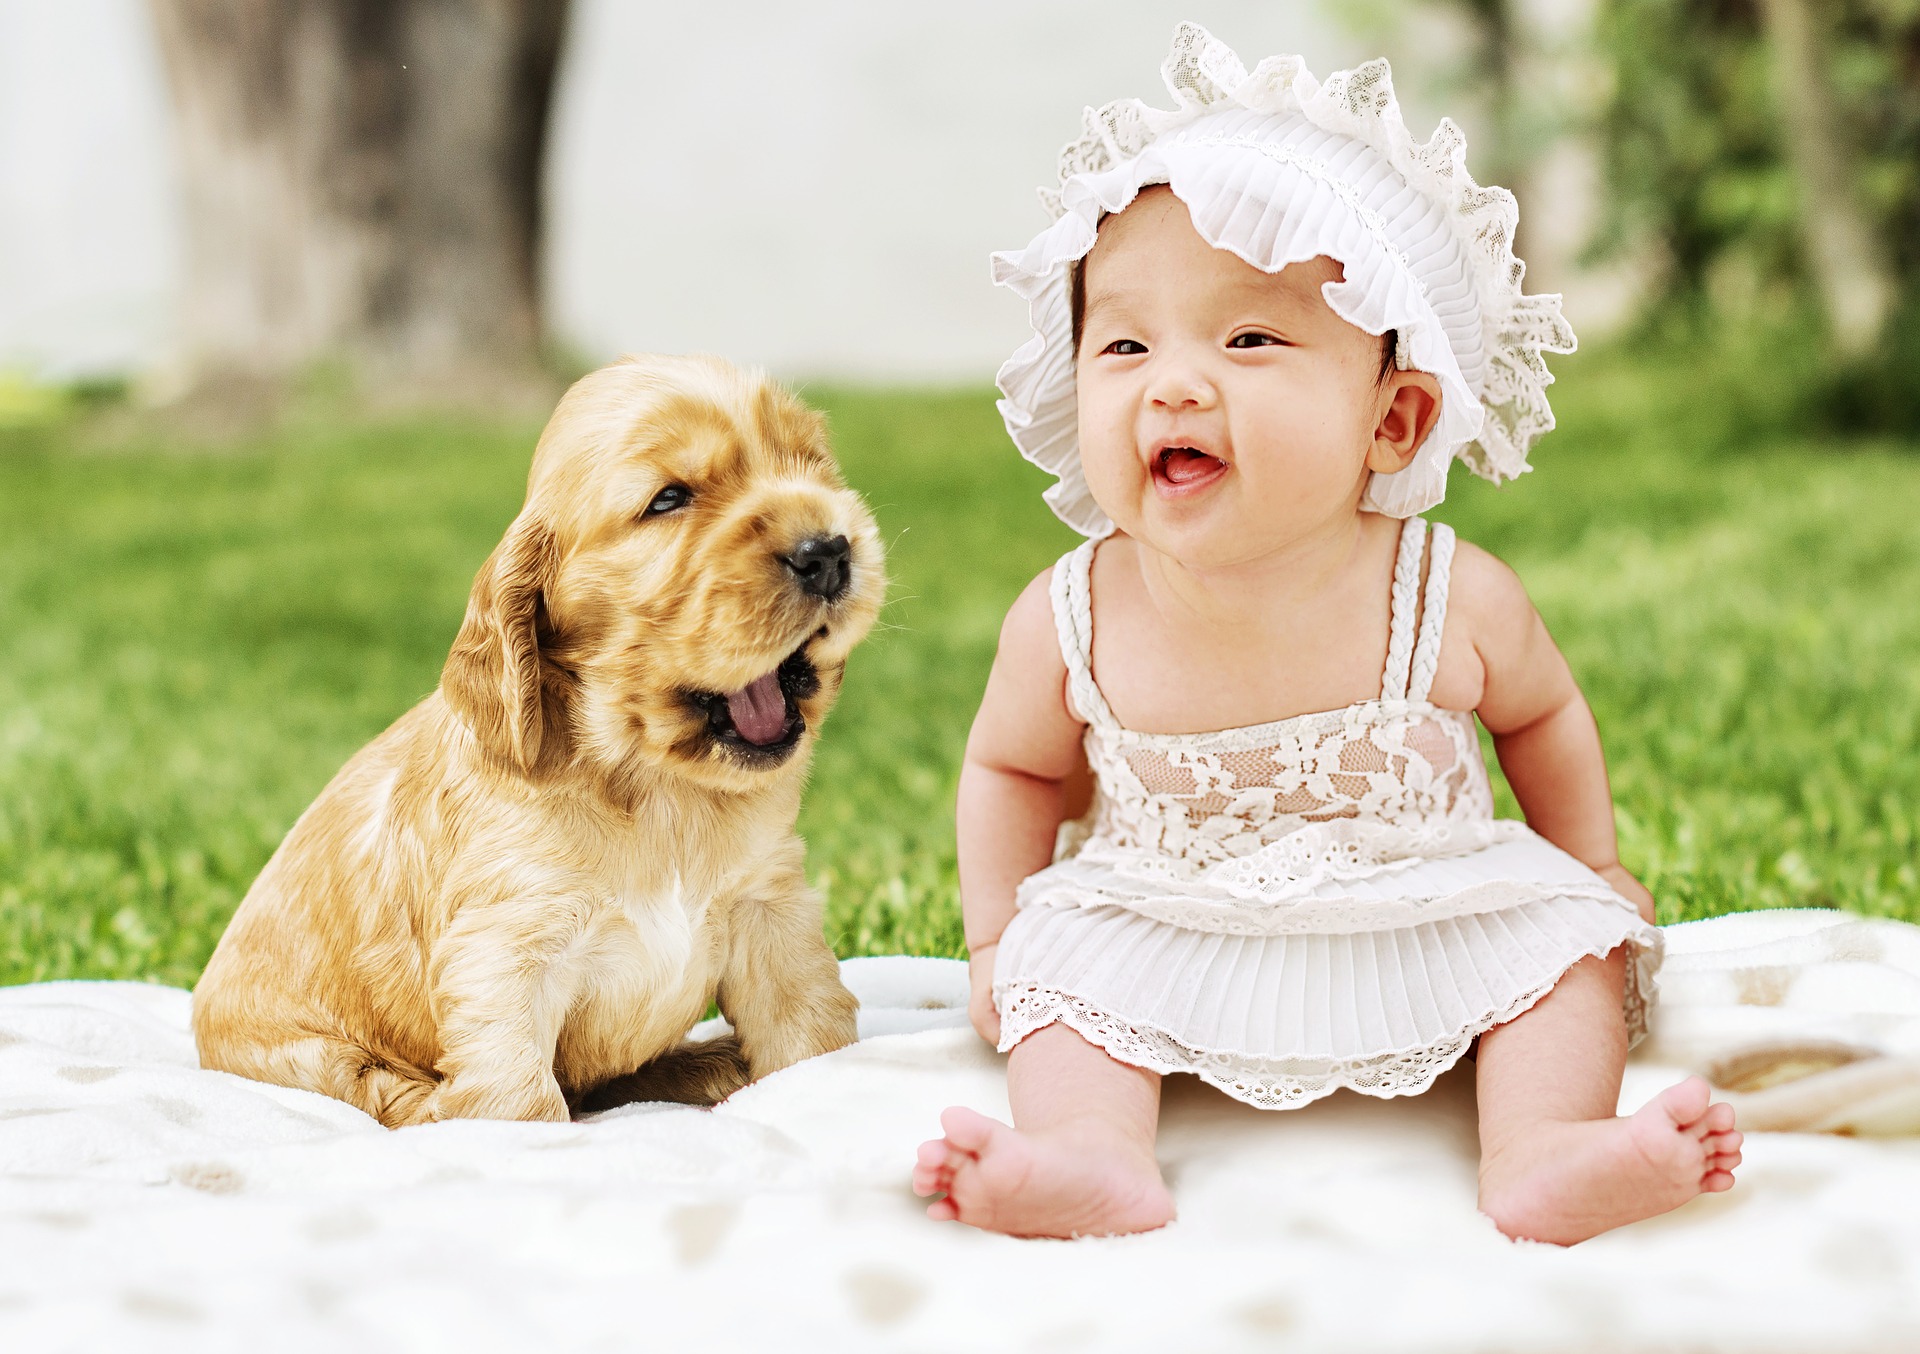 How to Introduce Pets to a Baby: Dogs and Cats